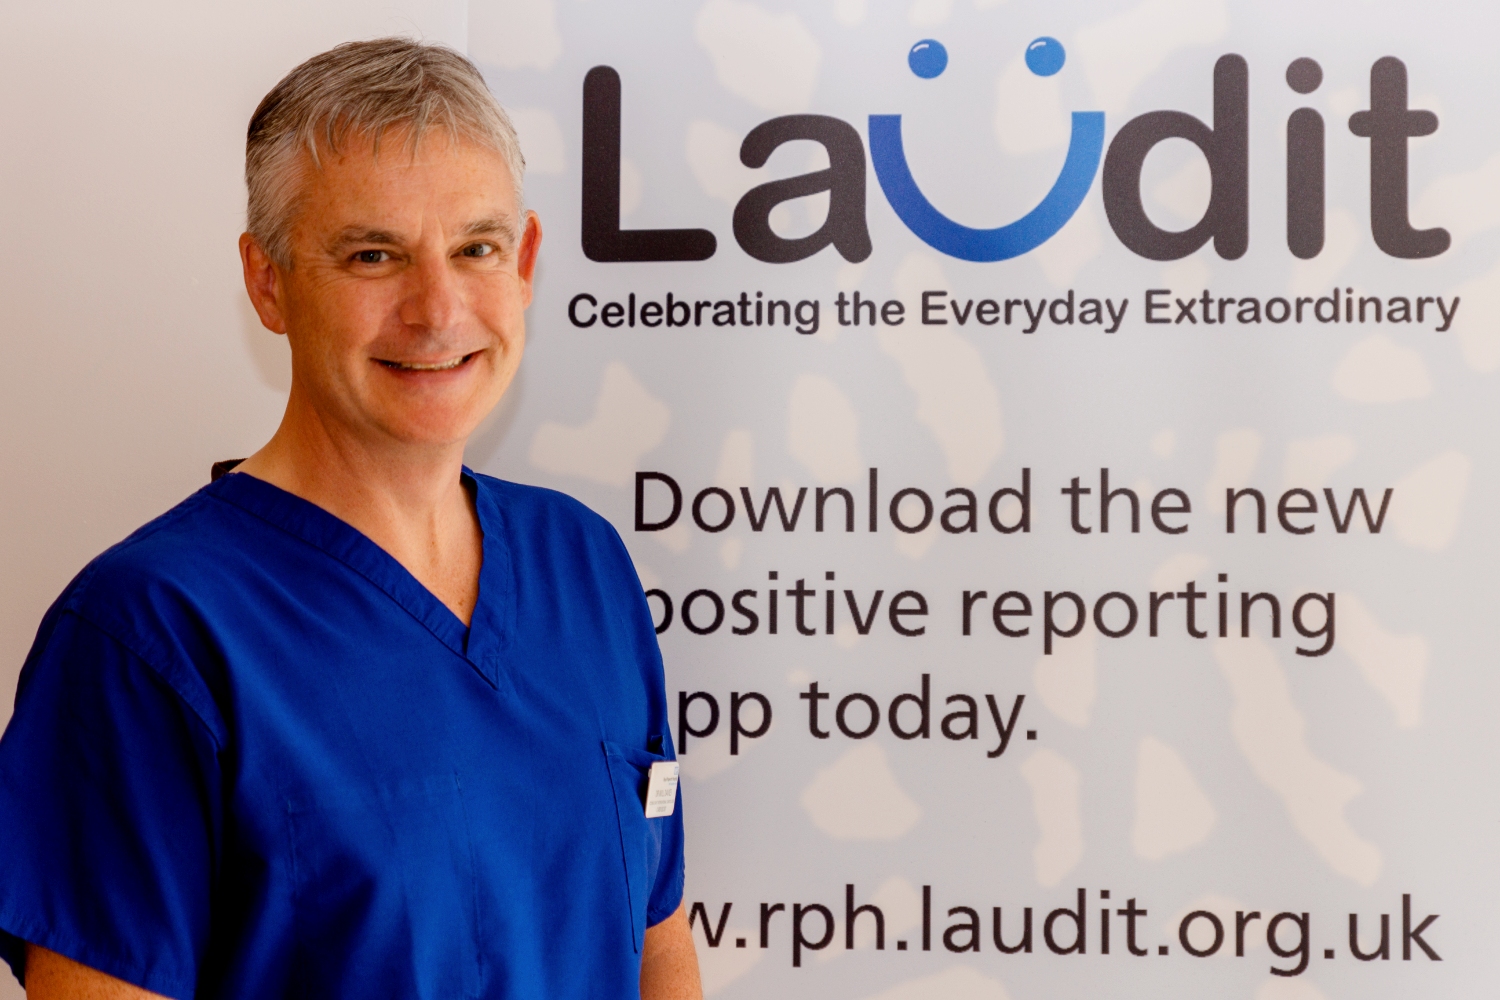 Will wearing blue scrubs, smiling in front of a banner saying Laudit - Celebrating the everday extraordinary